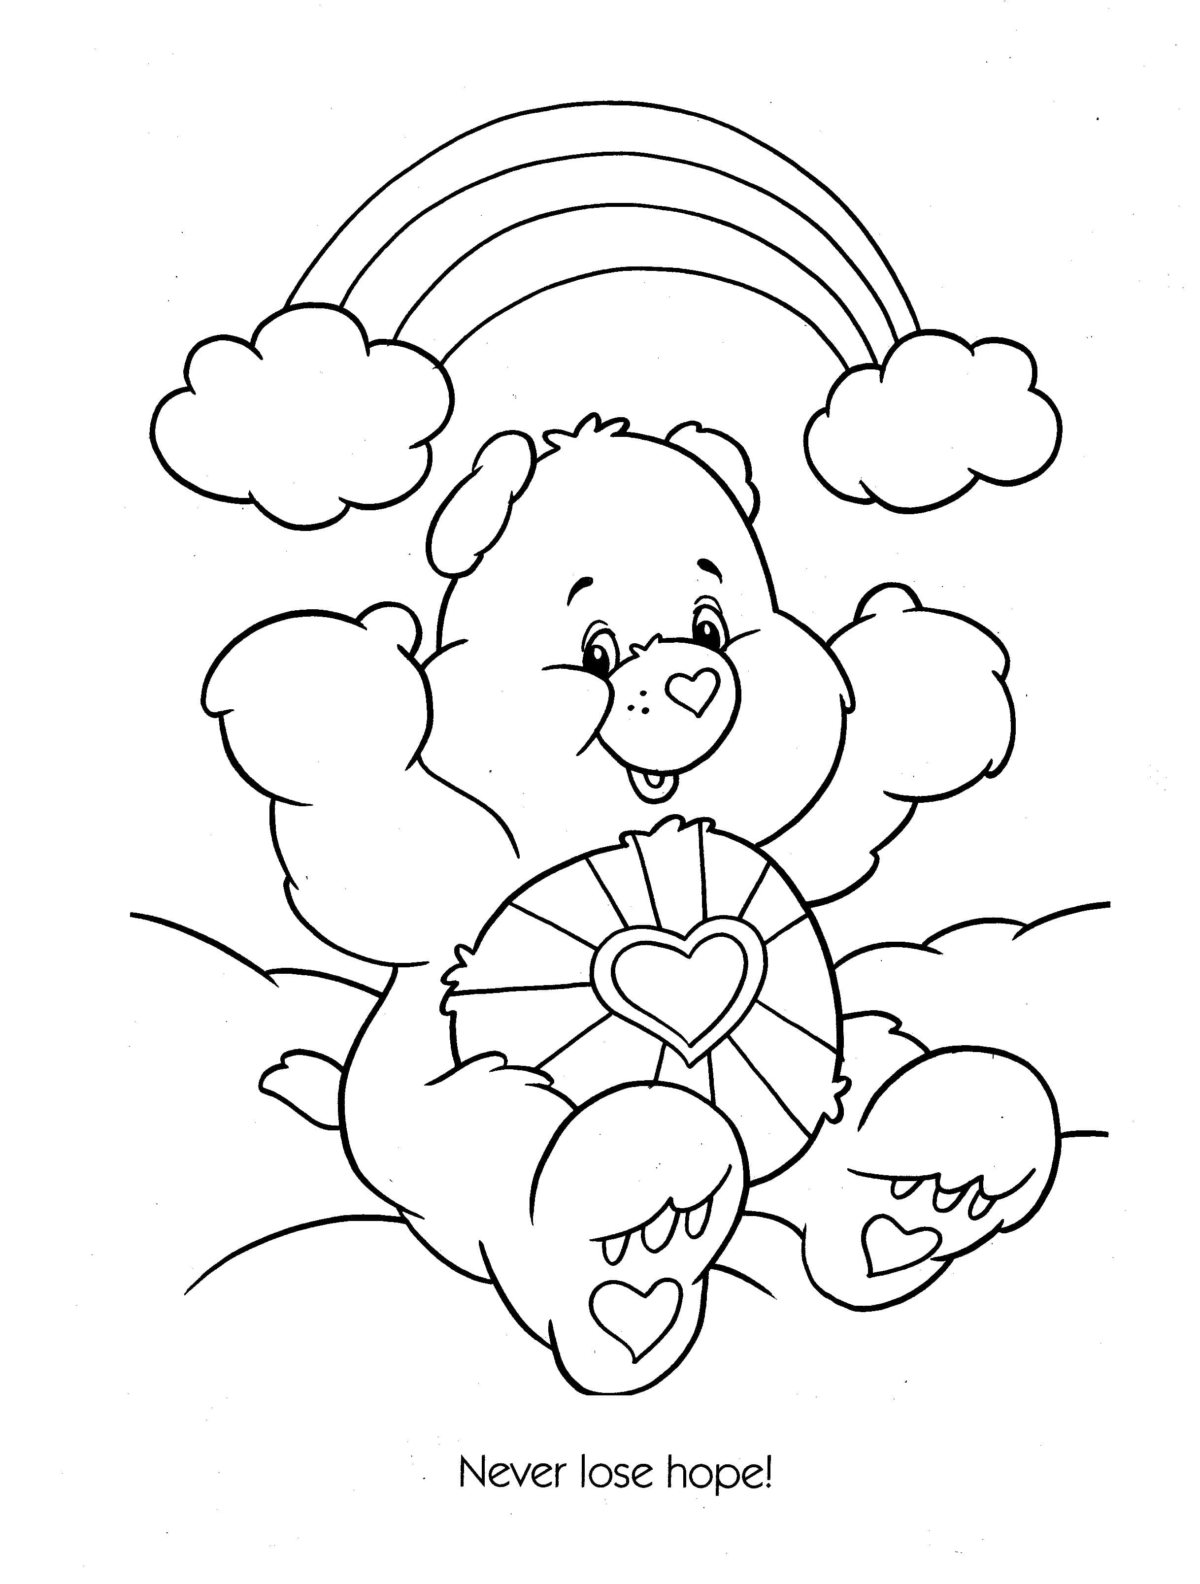 Rainbow Coloring Pages. Free Printable 90 Best Images